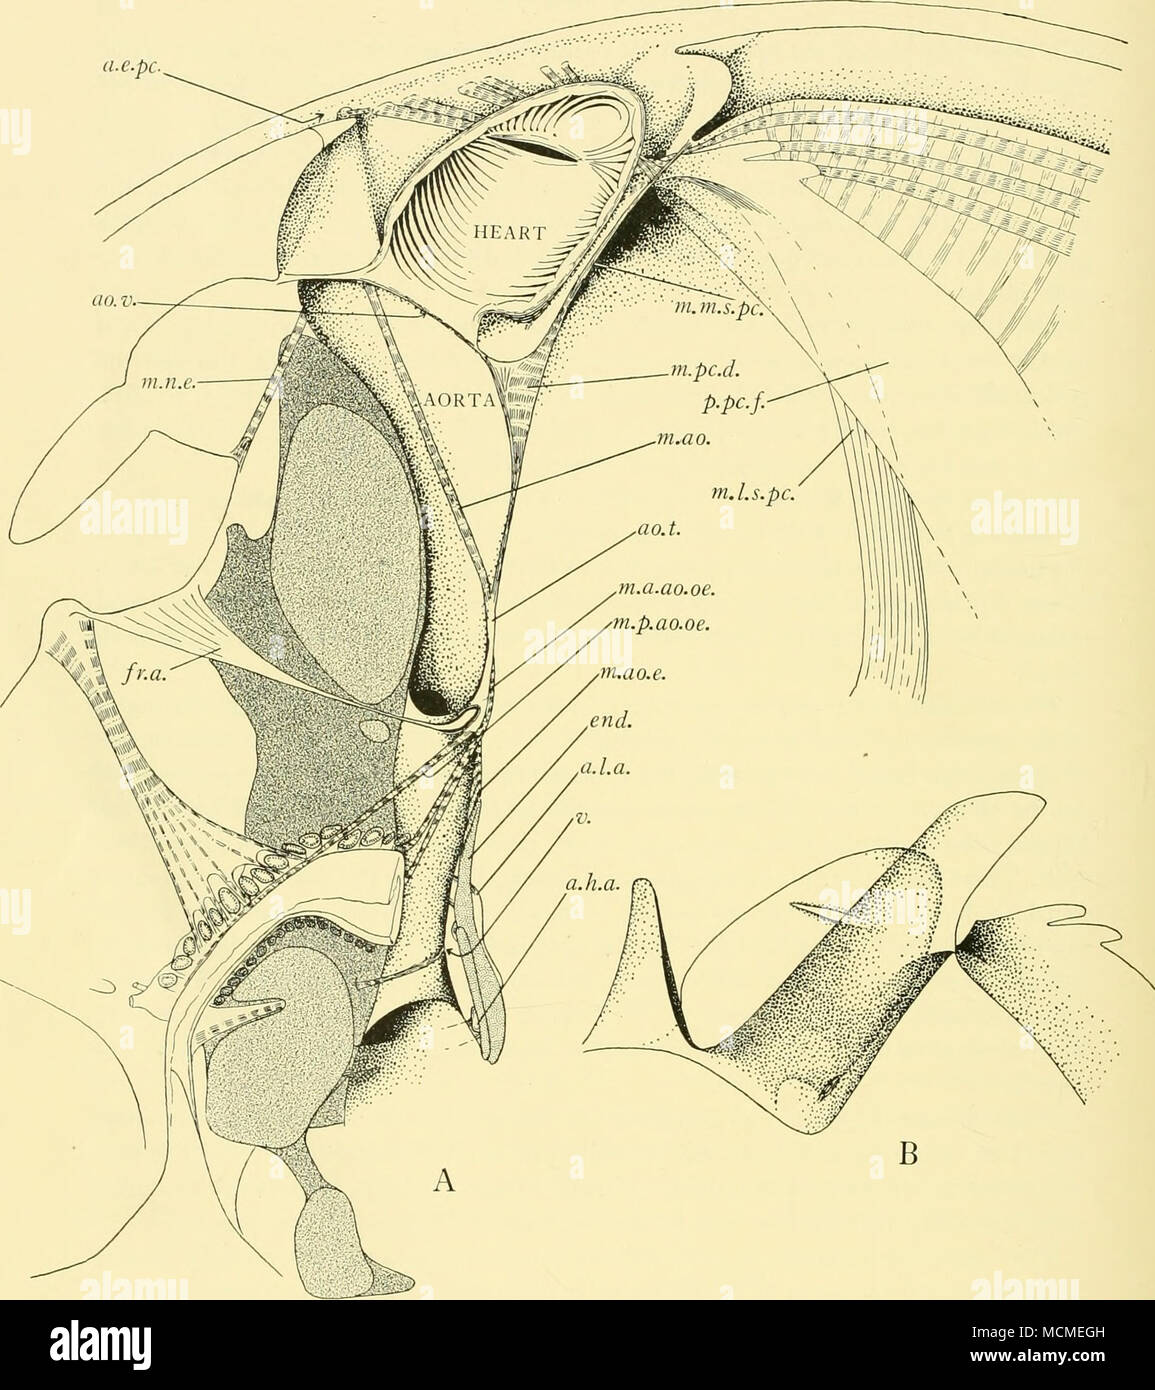 . Fig. 4. A. Right half of the fore-part of Doloria levis, viewed from the sagittal plane, to show the blood system and associated muscles. B. Left half of pericardial floor and heart, which have been removed to obtain the view shown in Fig. 3 A. a.e.pc. anterior entrance to pericardium; a.h.a. anterior hypostomal apodeme; a.l.a. antenno-labral apodeme; ao.t. aortic tendon; ao.v. aortic valve; end. endosternite; fr.a. frontal apodeme; m.a.ao.oe. anterior aortic-oesophageal muscle; m.ao. aortic muscle; m.ao.e. aortic- endosteinite muscle; m.l.s.pc. lateral sub-pericardial muscle; m.tn.s.pc. med Stock Photo